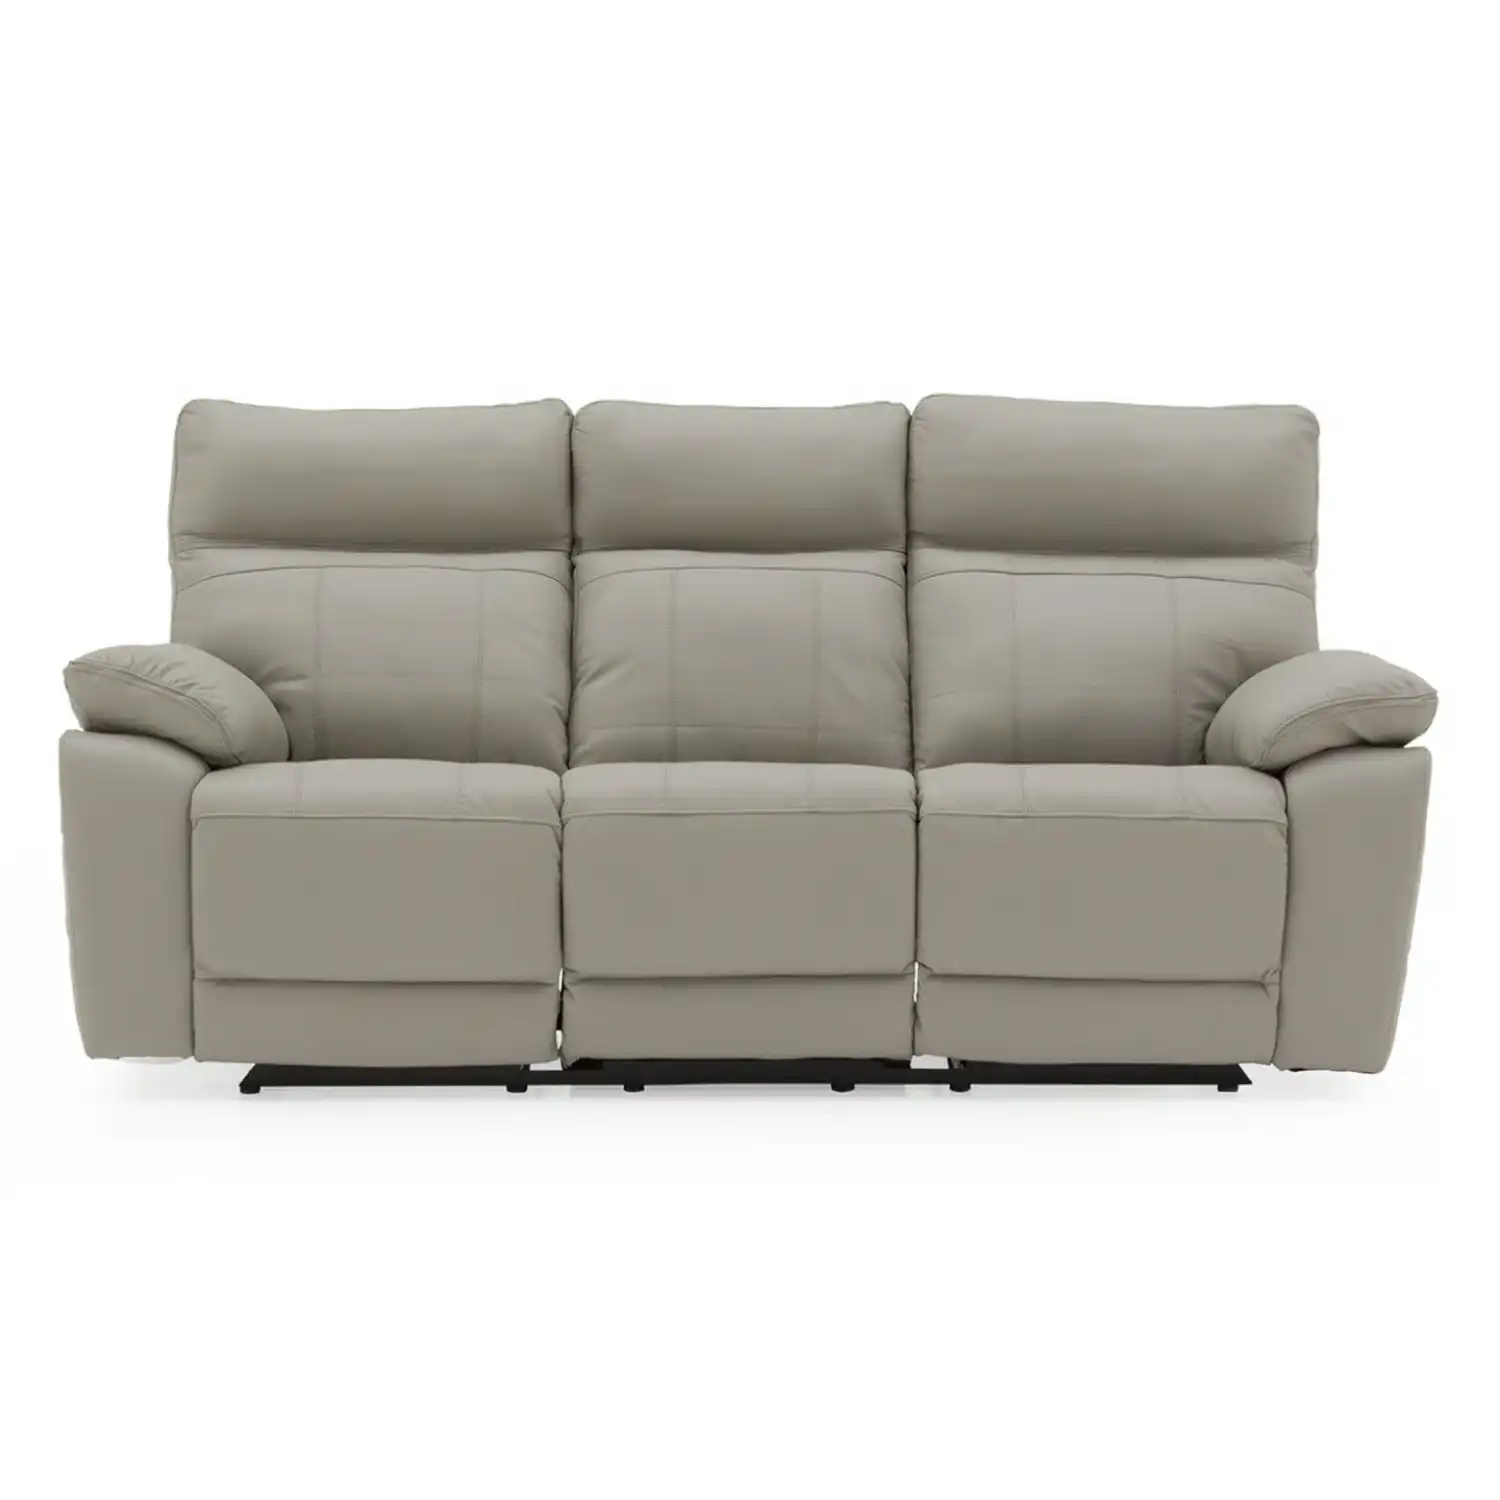 Grey Leather 3 Seater Recliner Sofa with Solid Wood